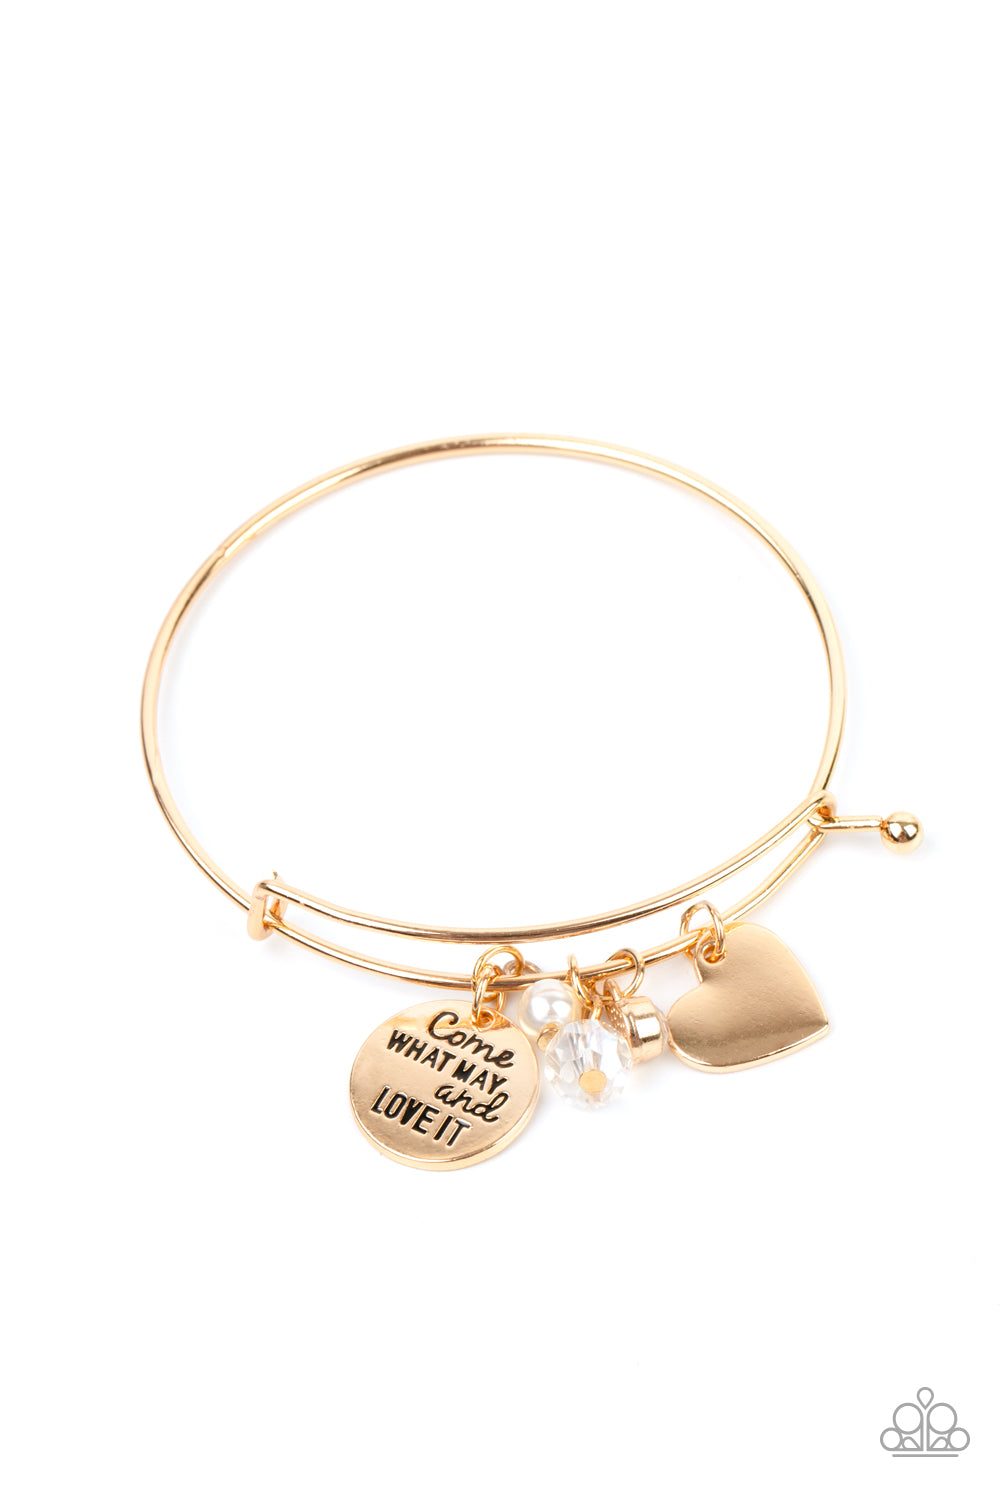 Come What May and Love It - Gold bracelet B051